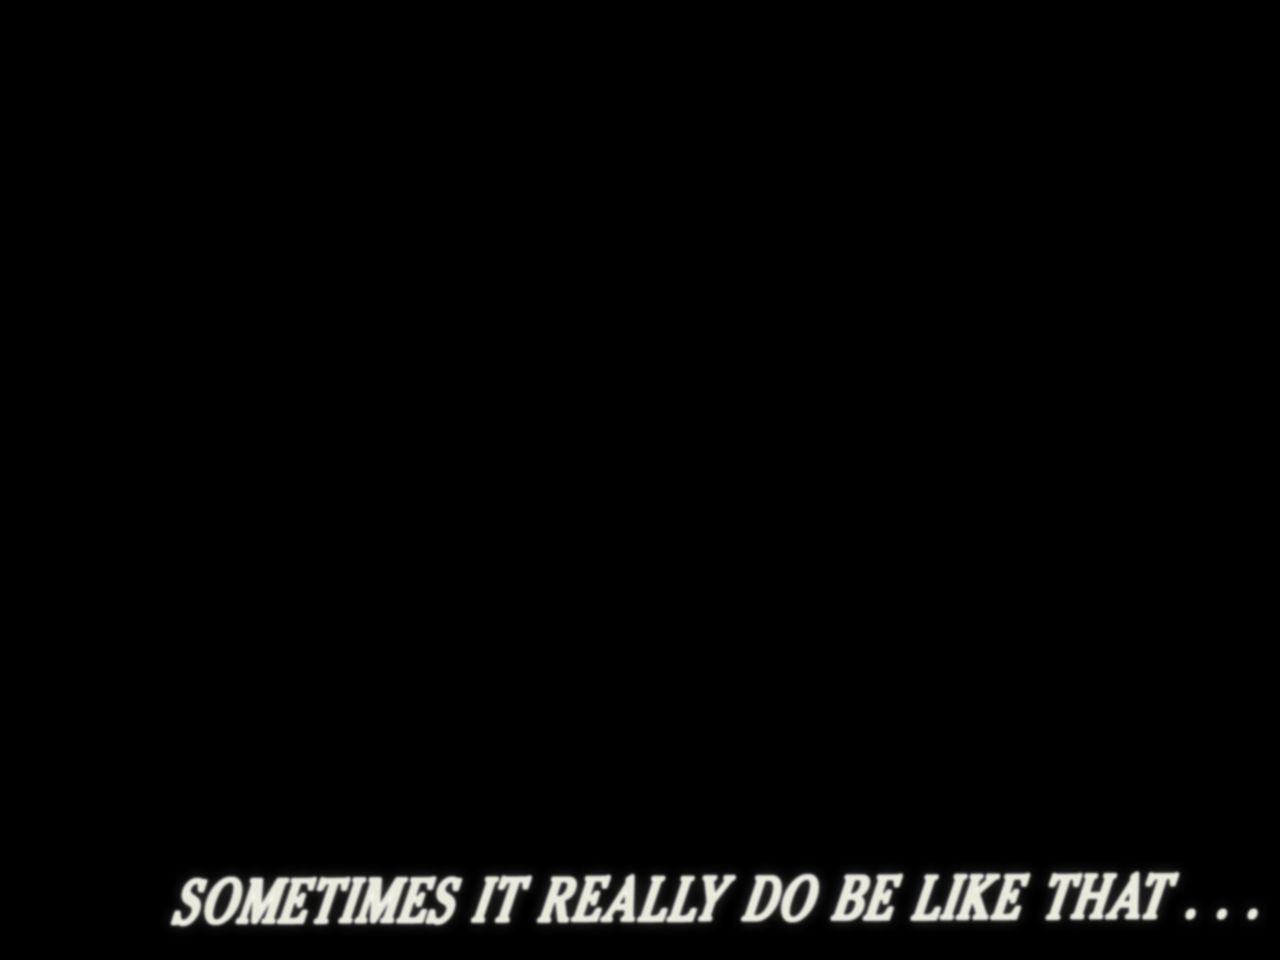 A Cowboy Bebop meme modeled after the show's ending title shot where the image is pitch black except for the text &quot;Sometimes It Really Do Be Like That&quot;